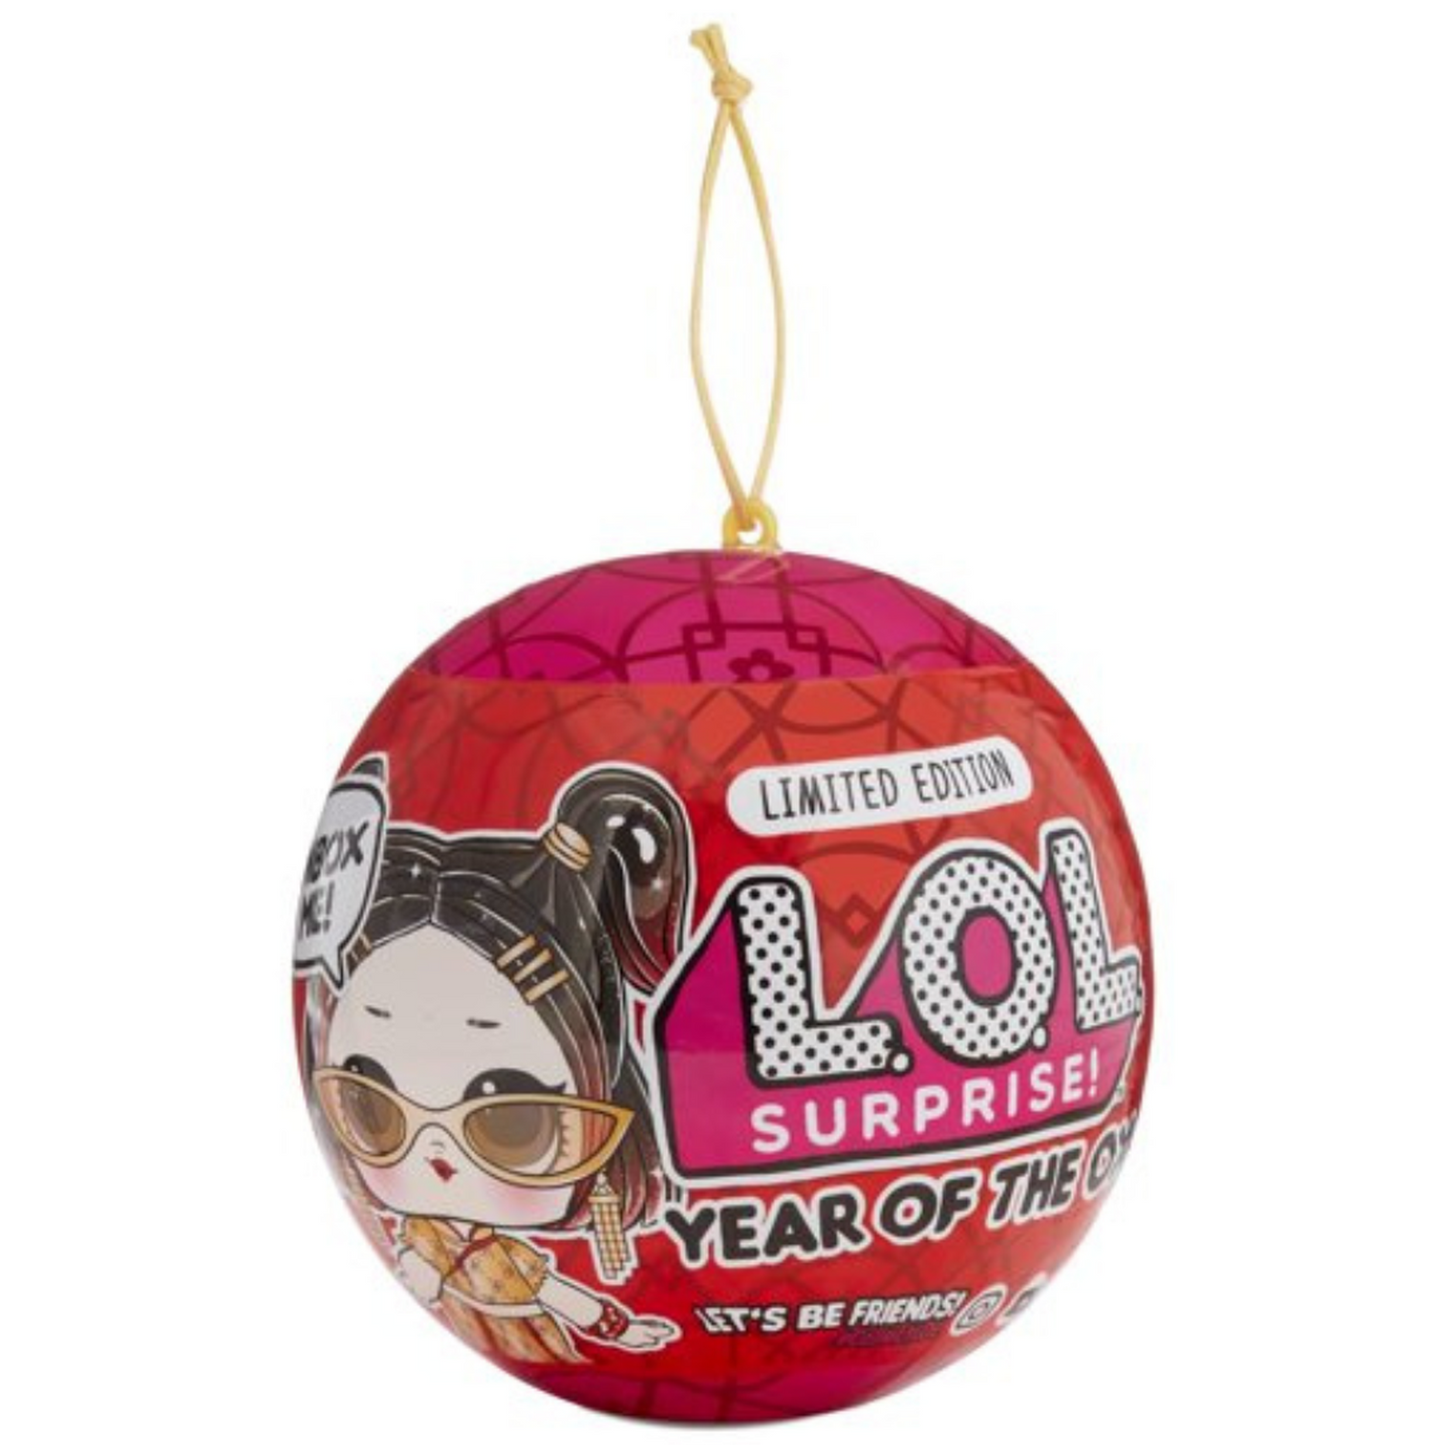 L.O.L. Surprise! Year of the Ox